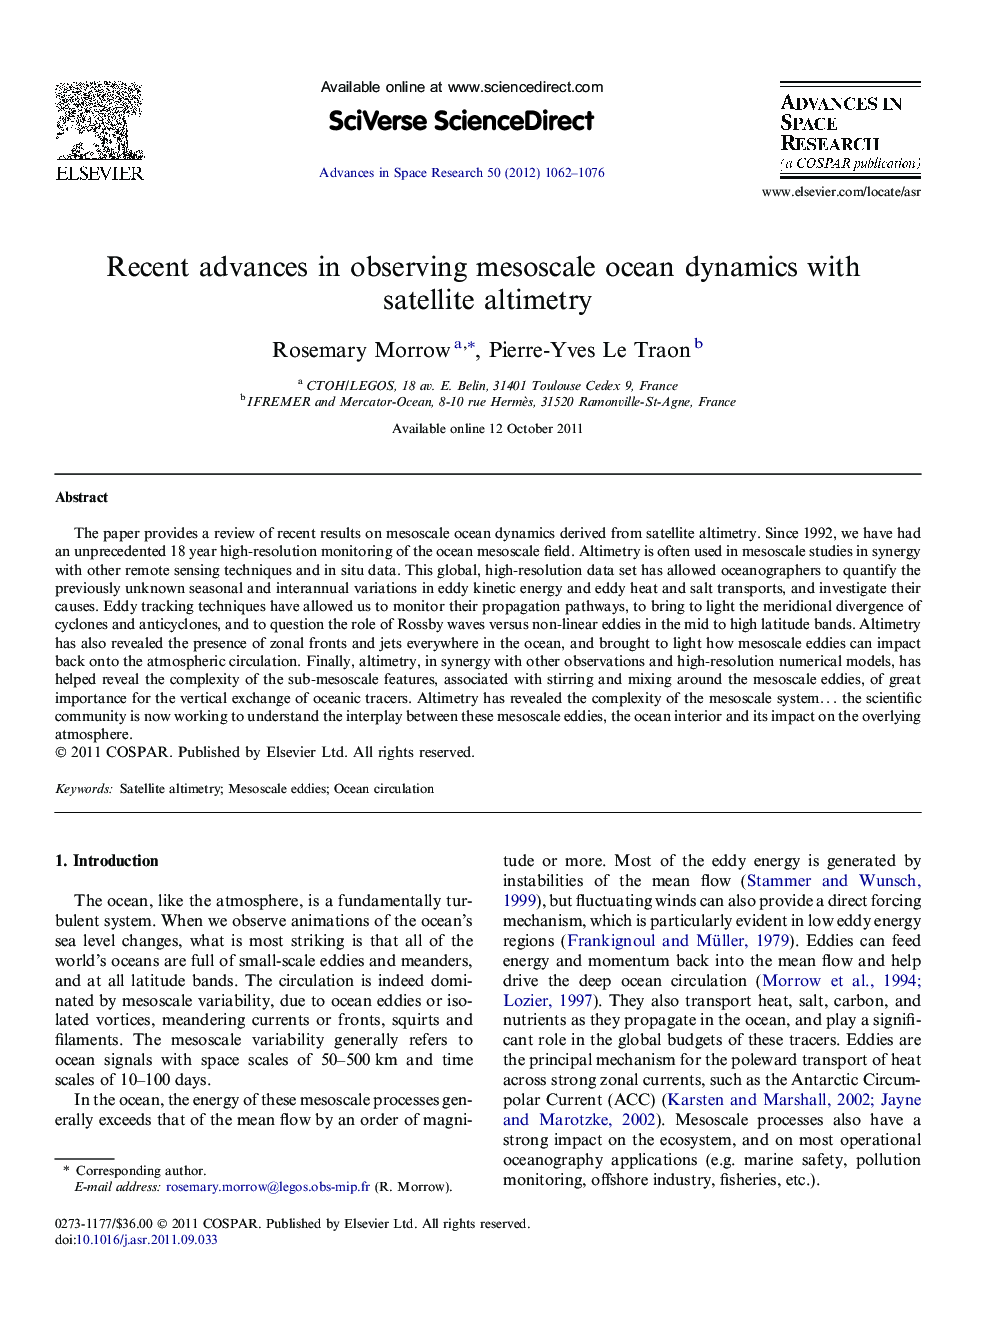 Recent advances in observing mesoscale ocean dynamics with satellite altimetry